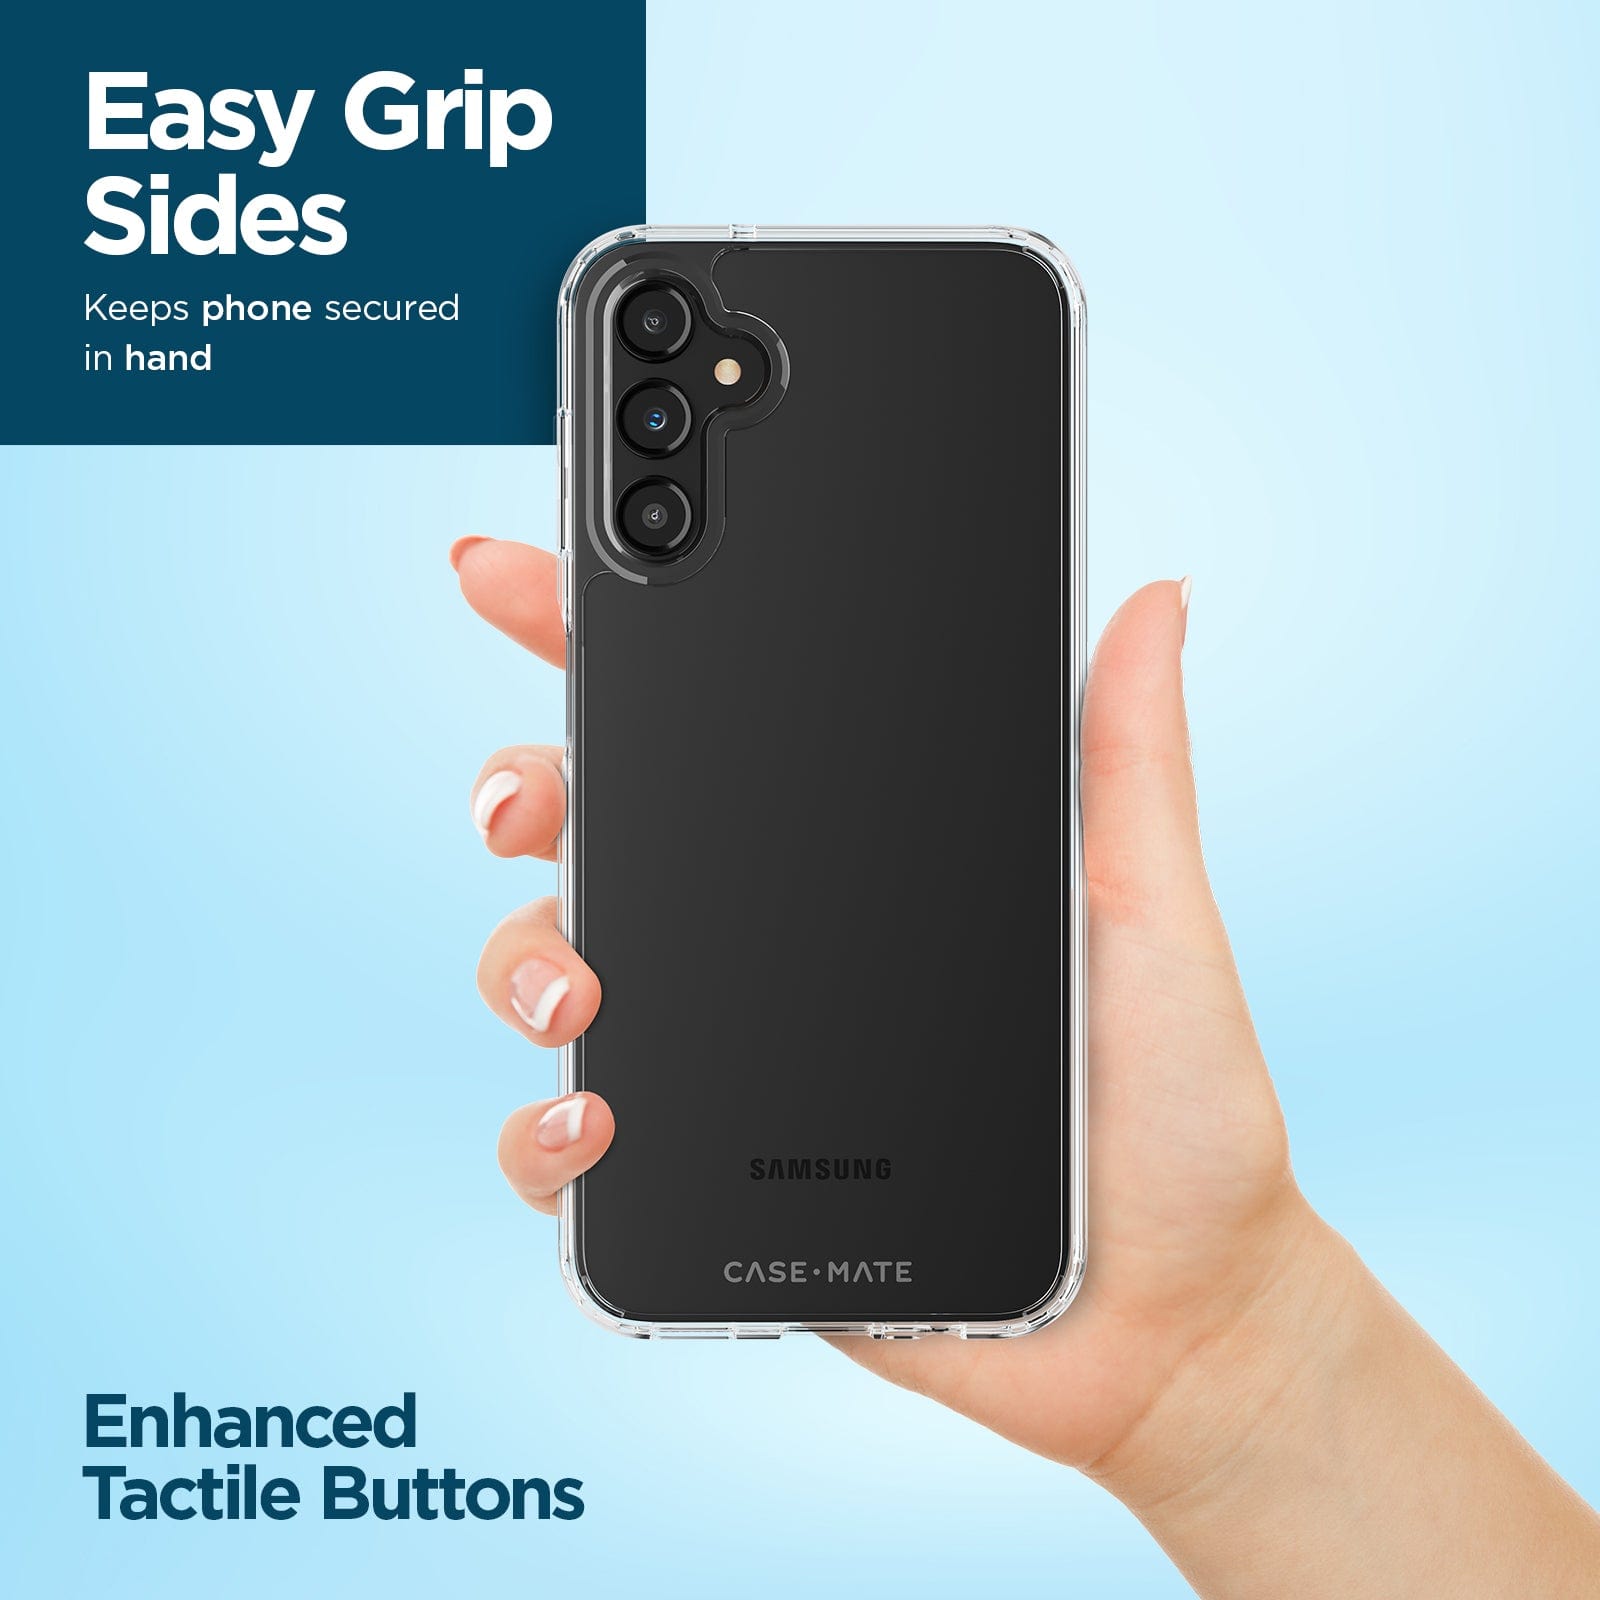 EASY GRIP SIDES KEEPS PHONE SECURED IN HAND. ENHANCED TACTILE BUTTONS